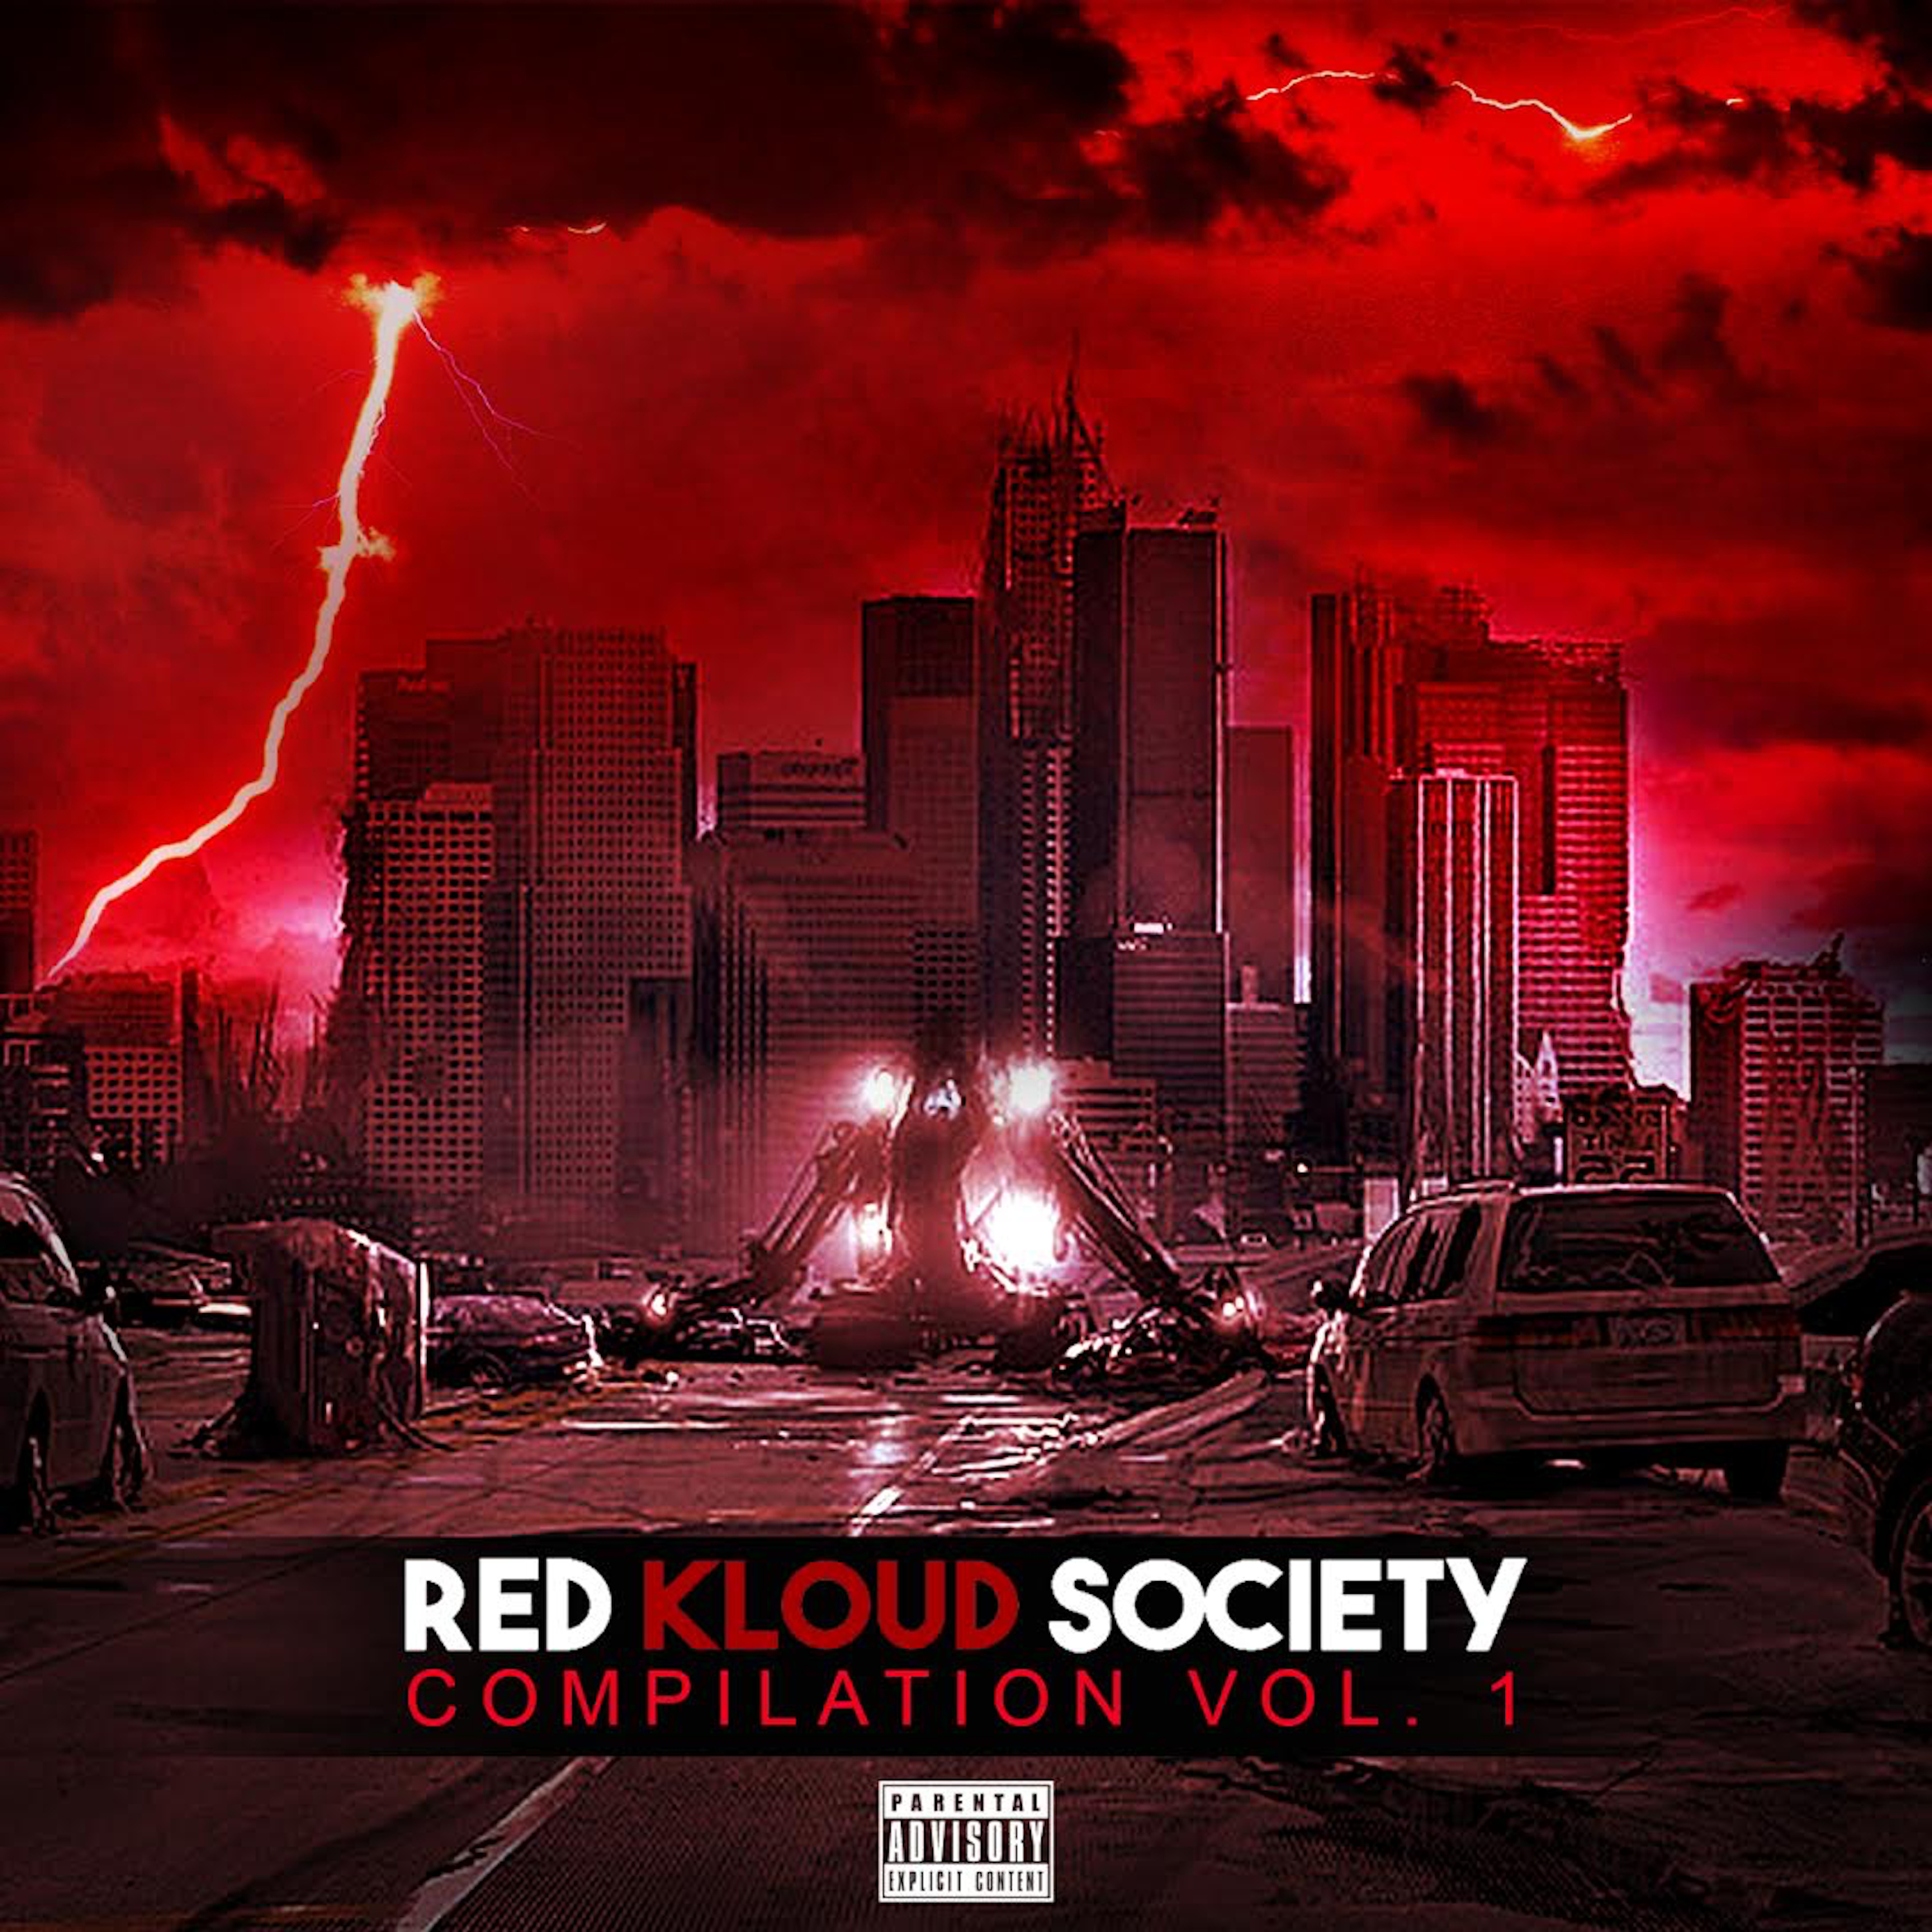 Red Kloud Society Compilation Vol. 1